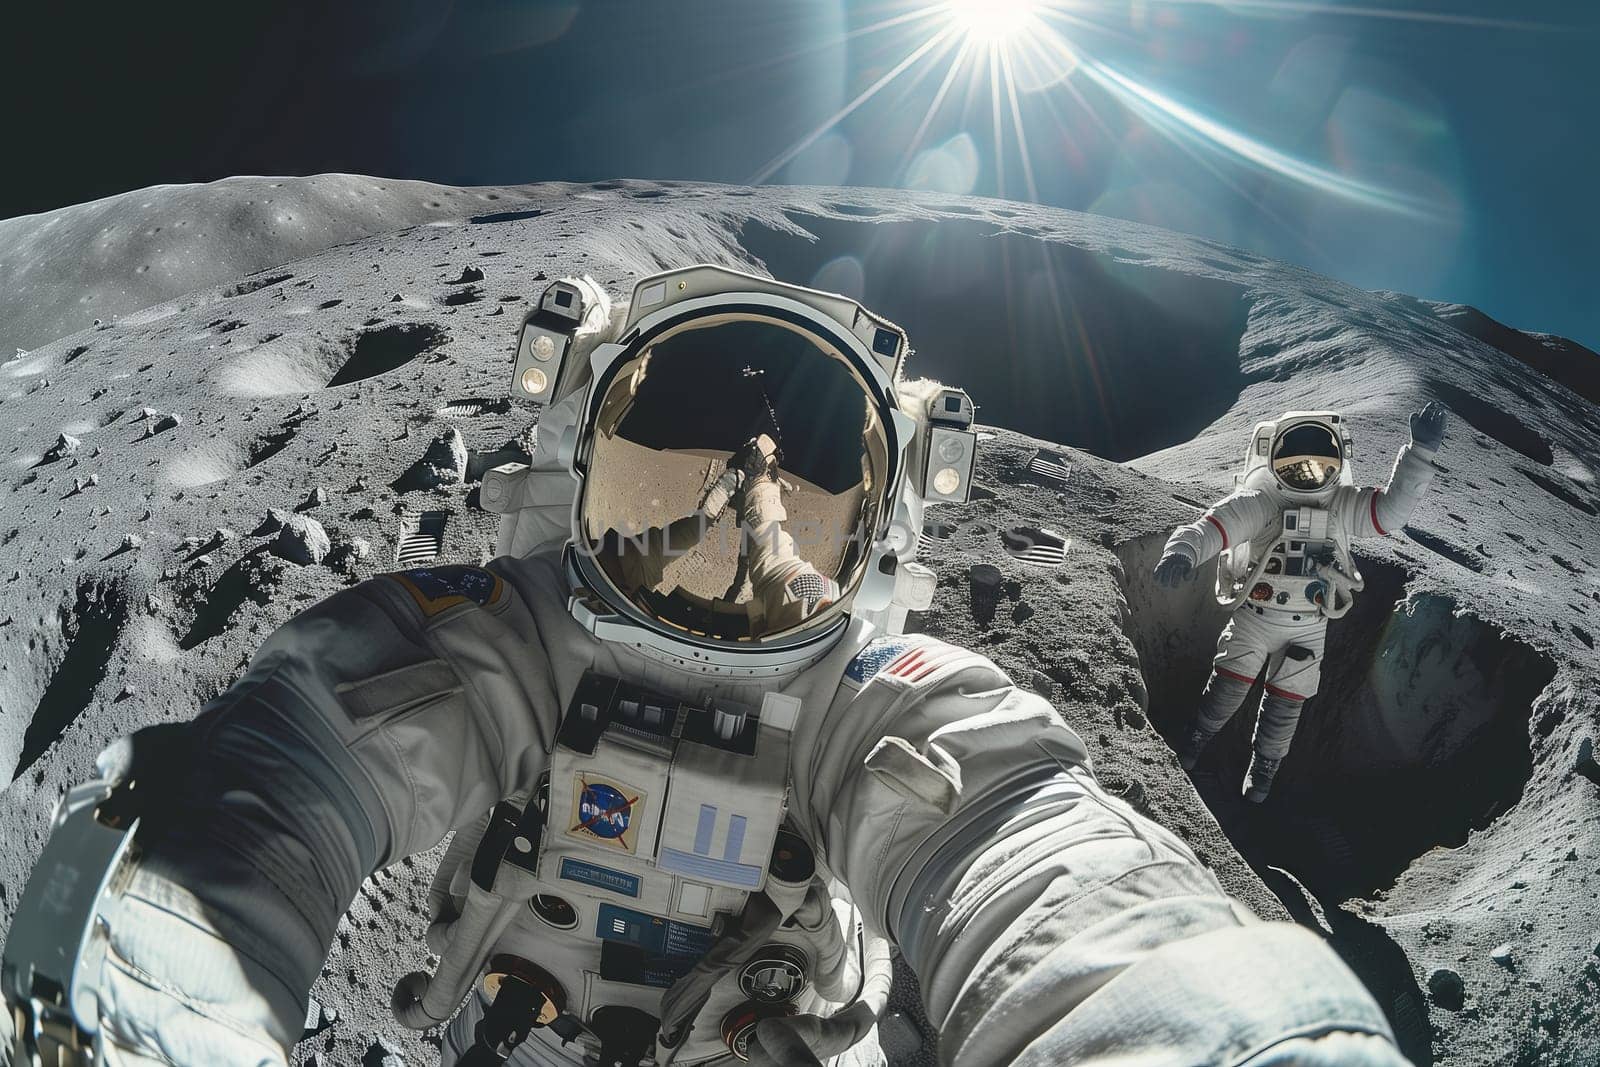 An astronaut in personal protective equipment is taking a selfie on the moons barren landscape, surrounded by darkness and the vastness of space